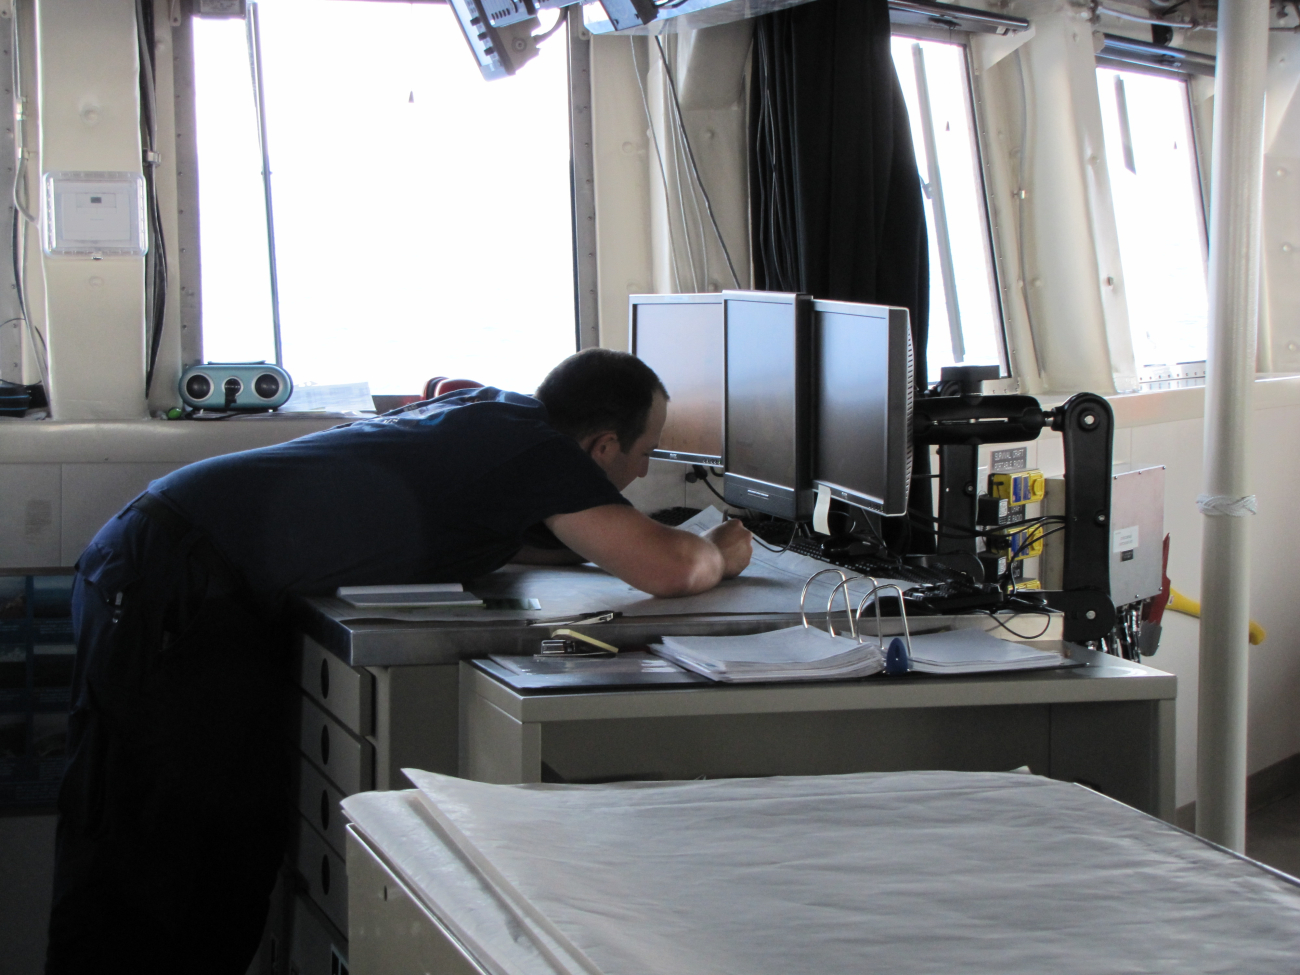 Although electronic charts are used, the officer of the deck is maintaining  aseparate paper chart plot of navigation